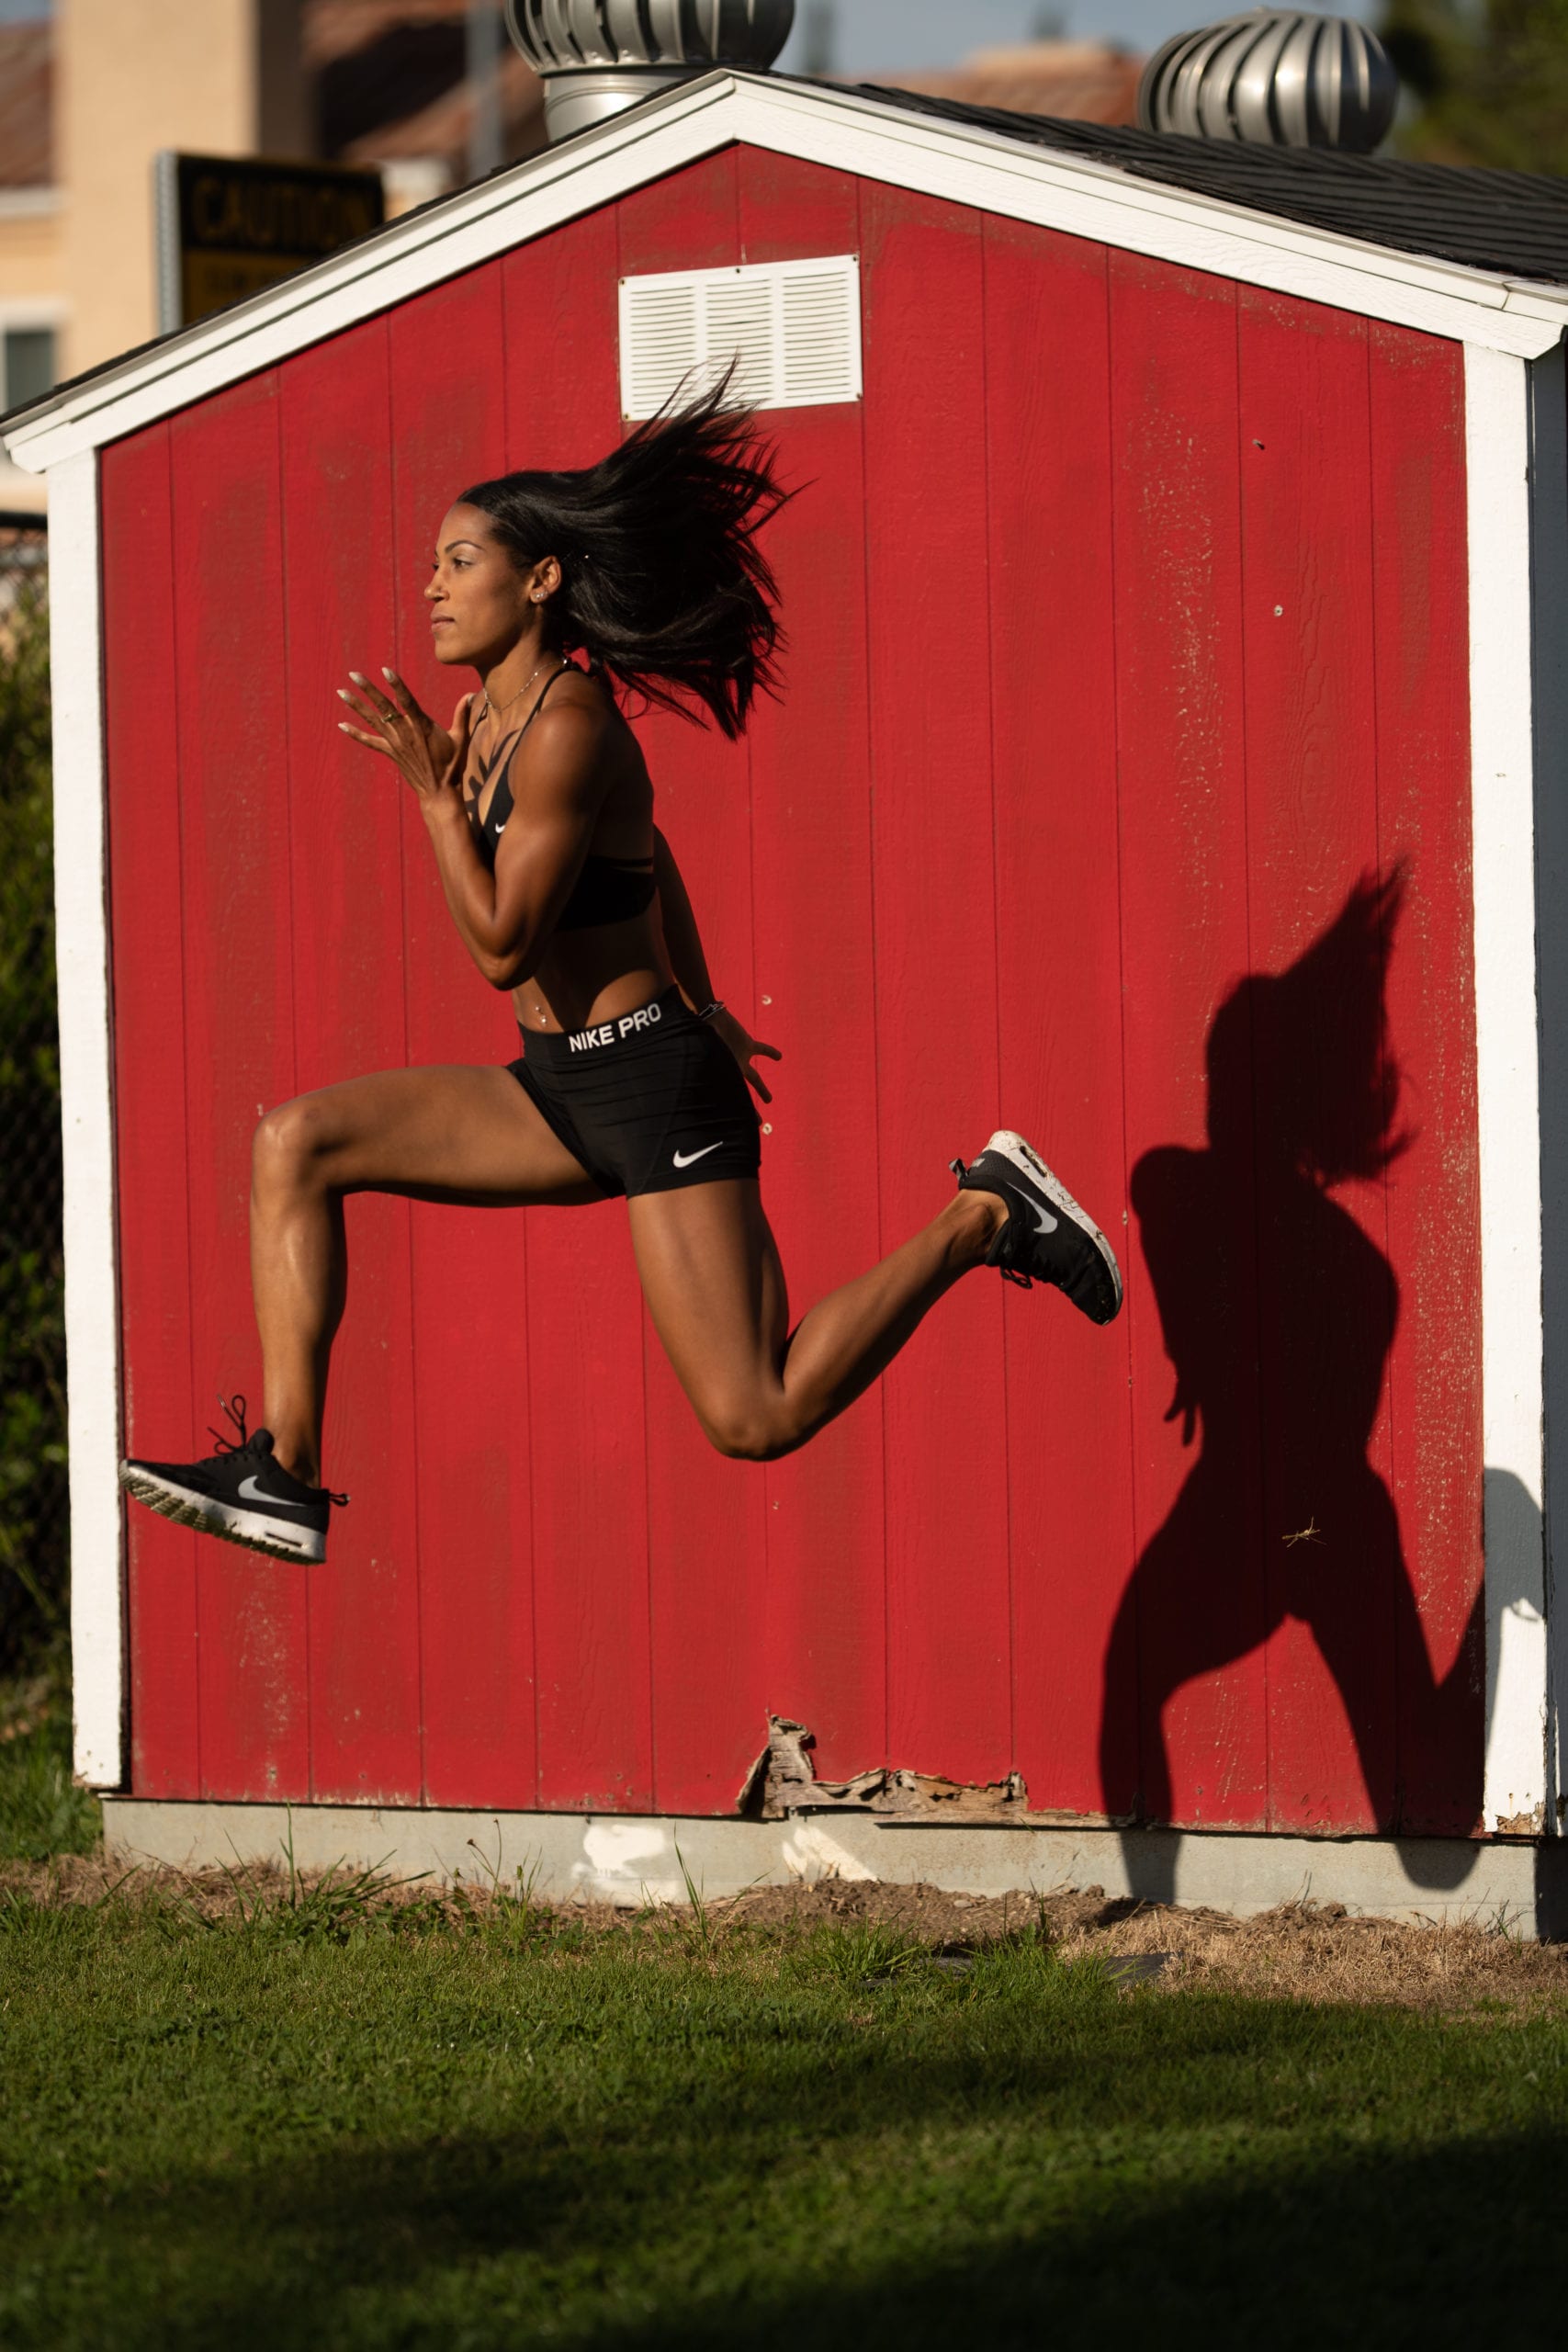 Karelle Edwards Canadian Olympic Athlete jumping in front of a red shed